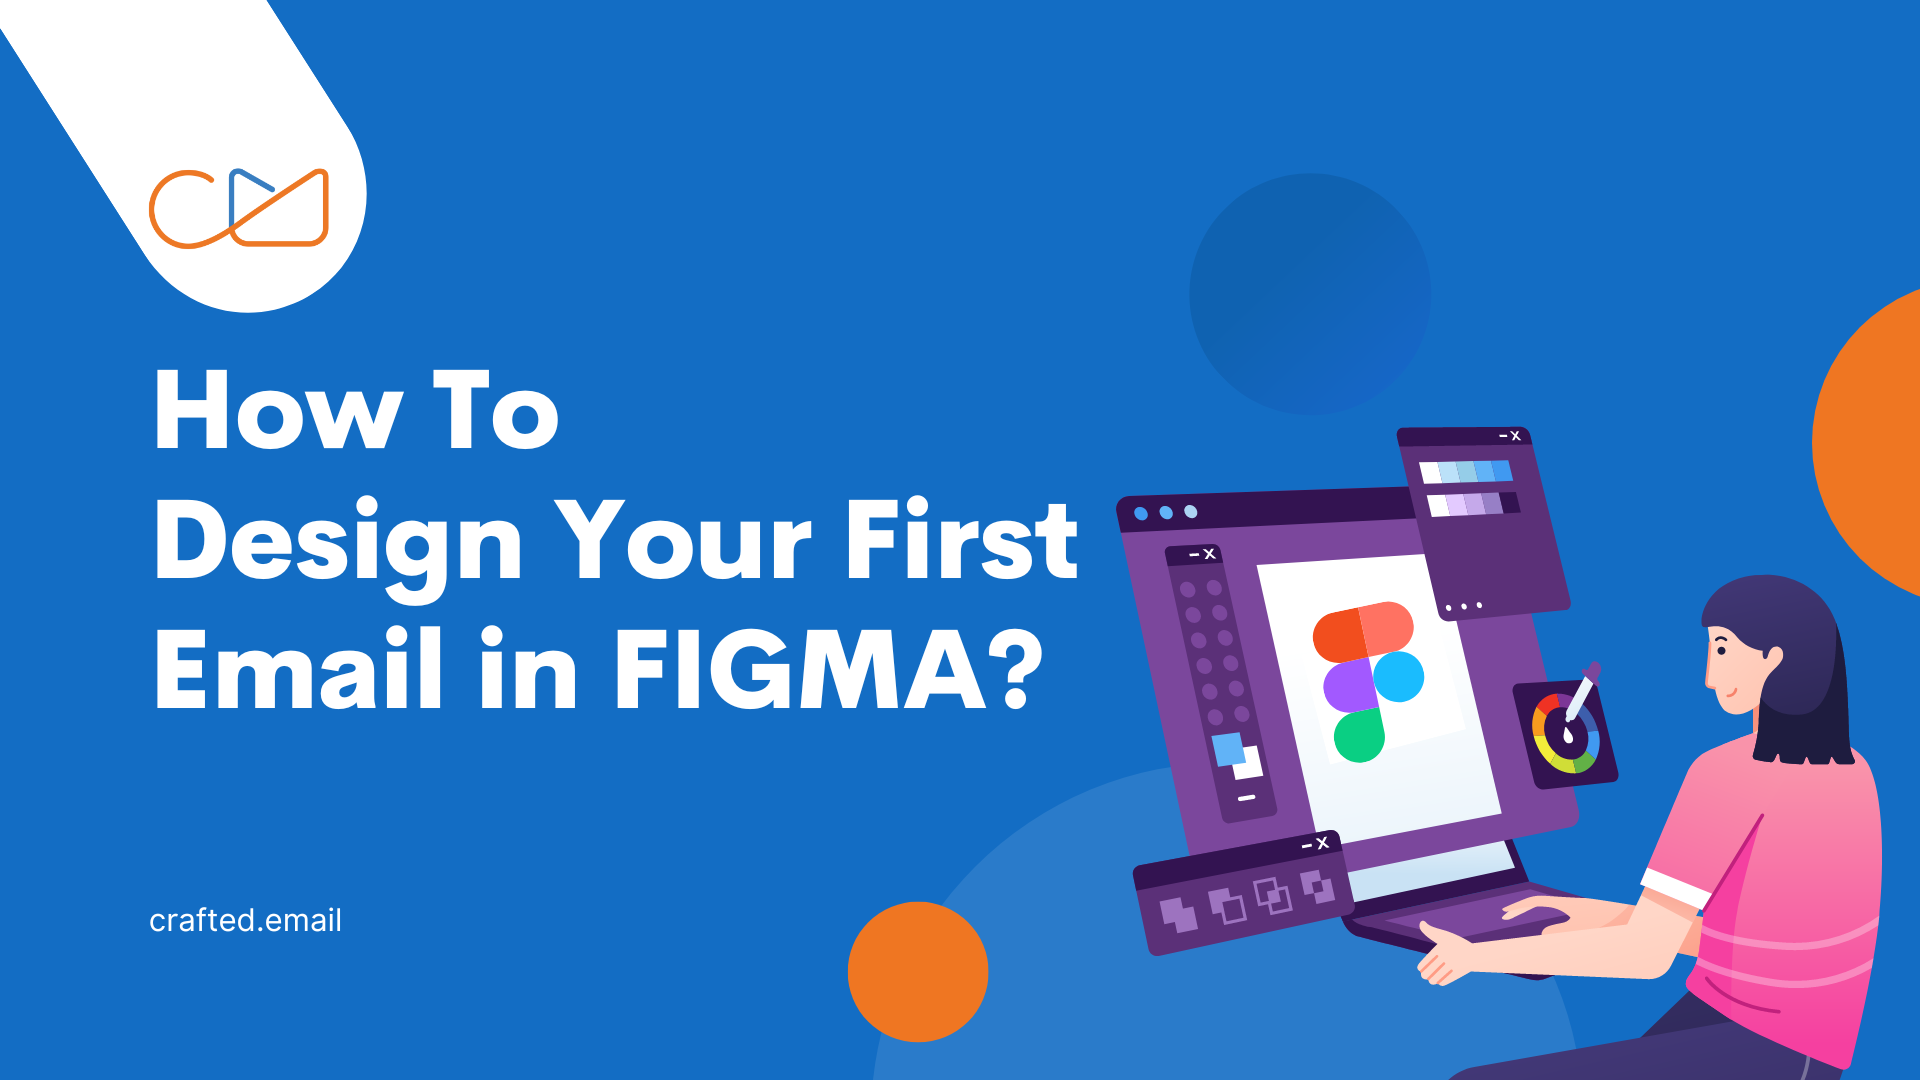 How to design your first email in FIGMA?